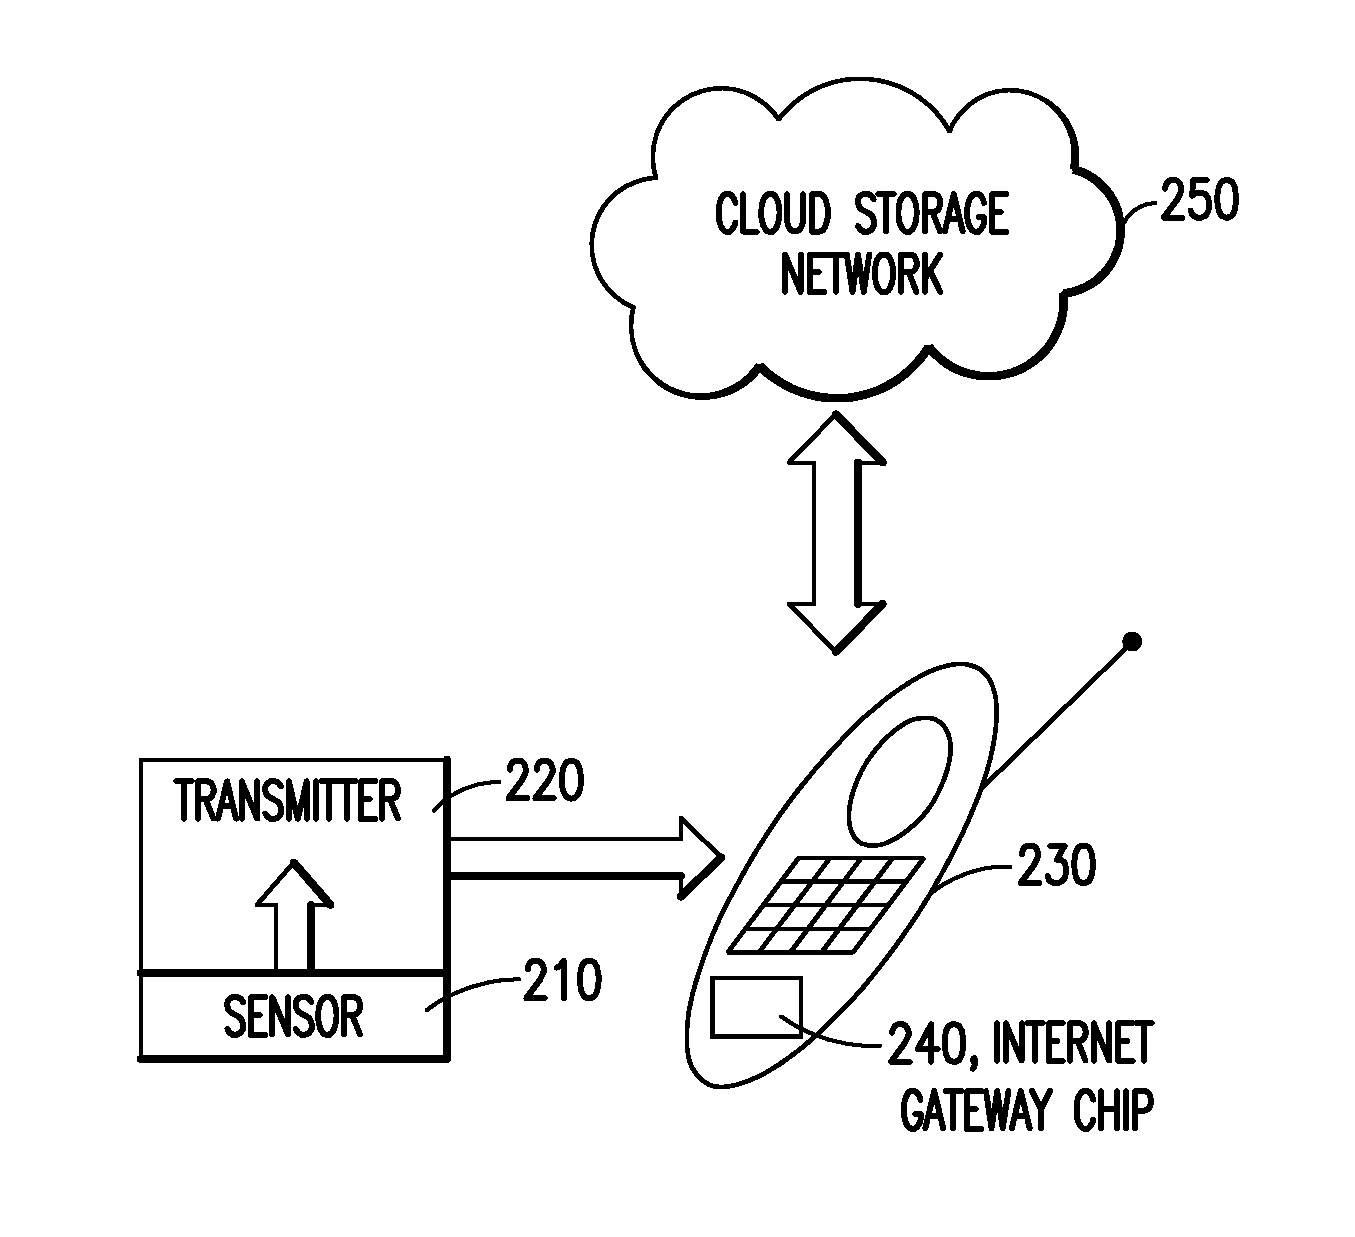 Direct cgm connectivity to a cloud storage network